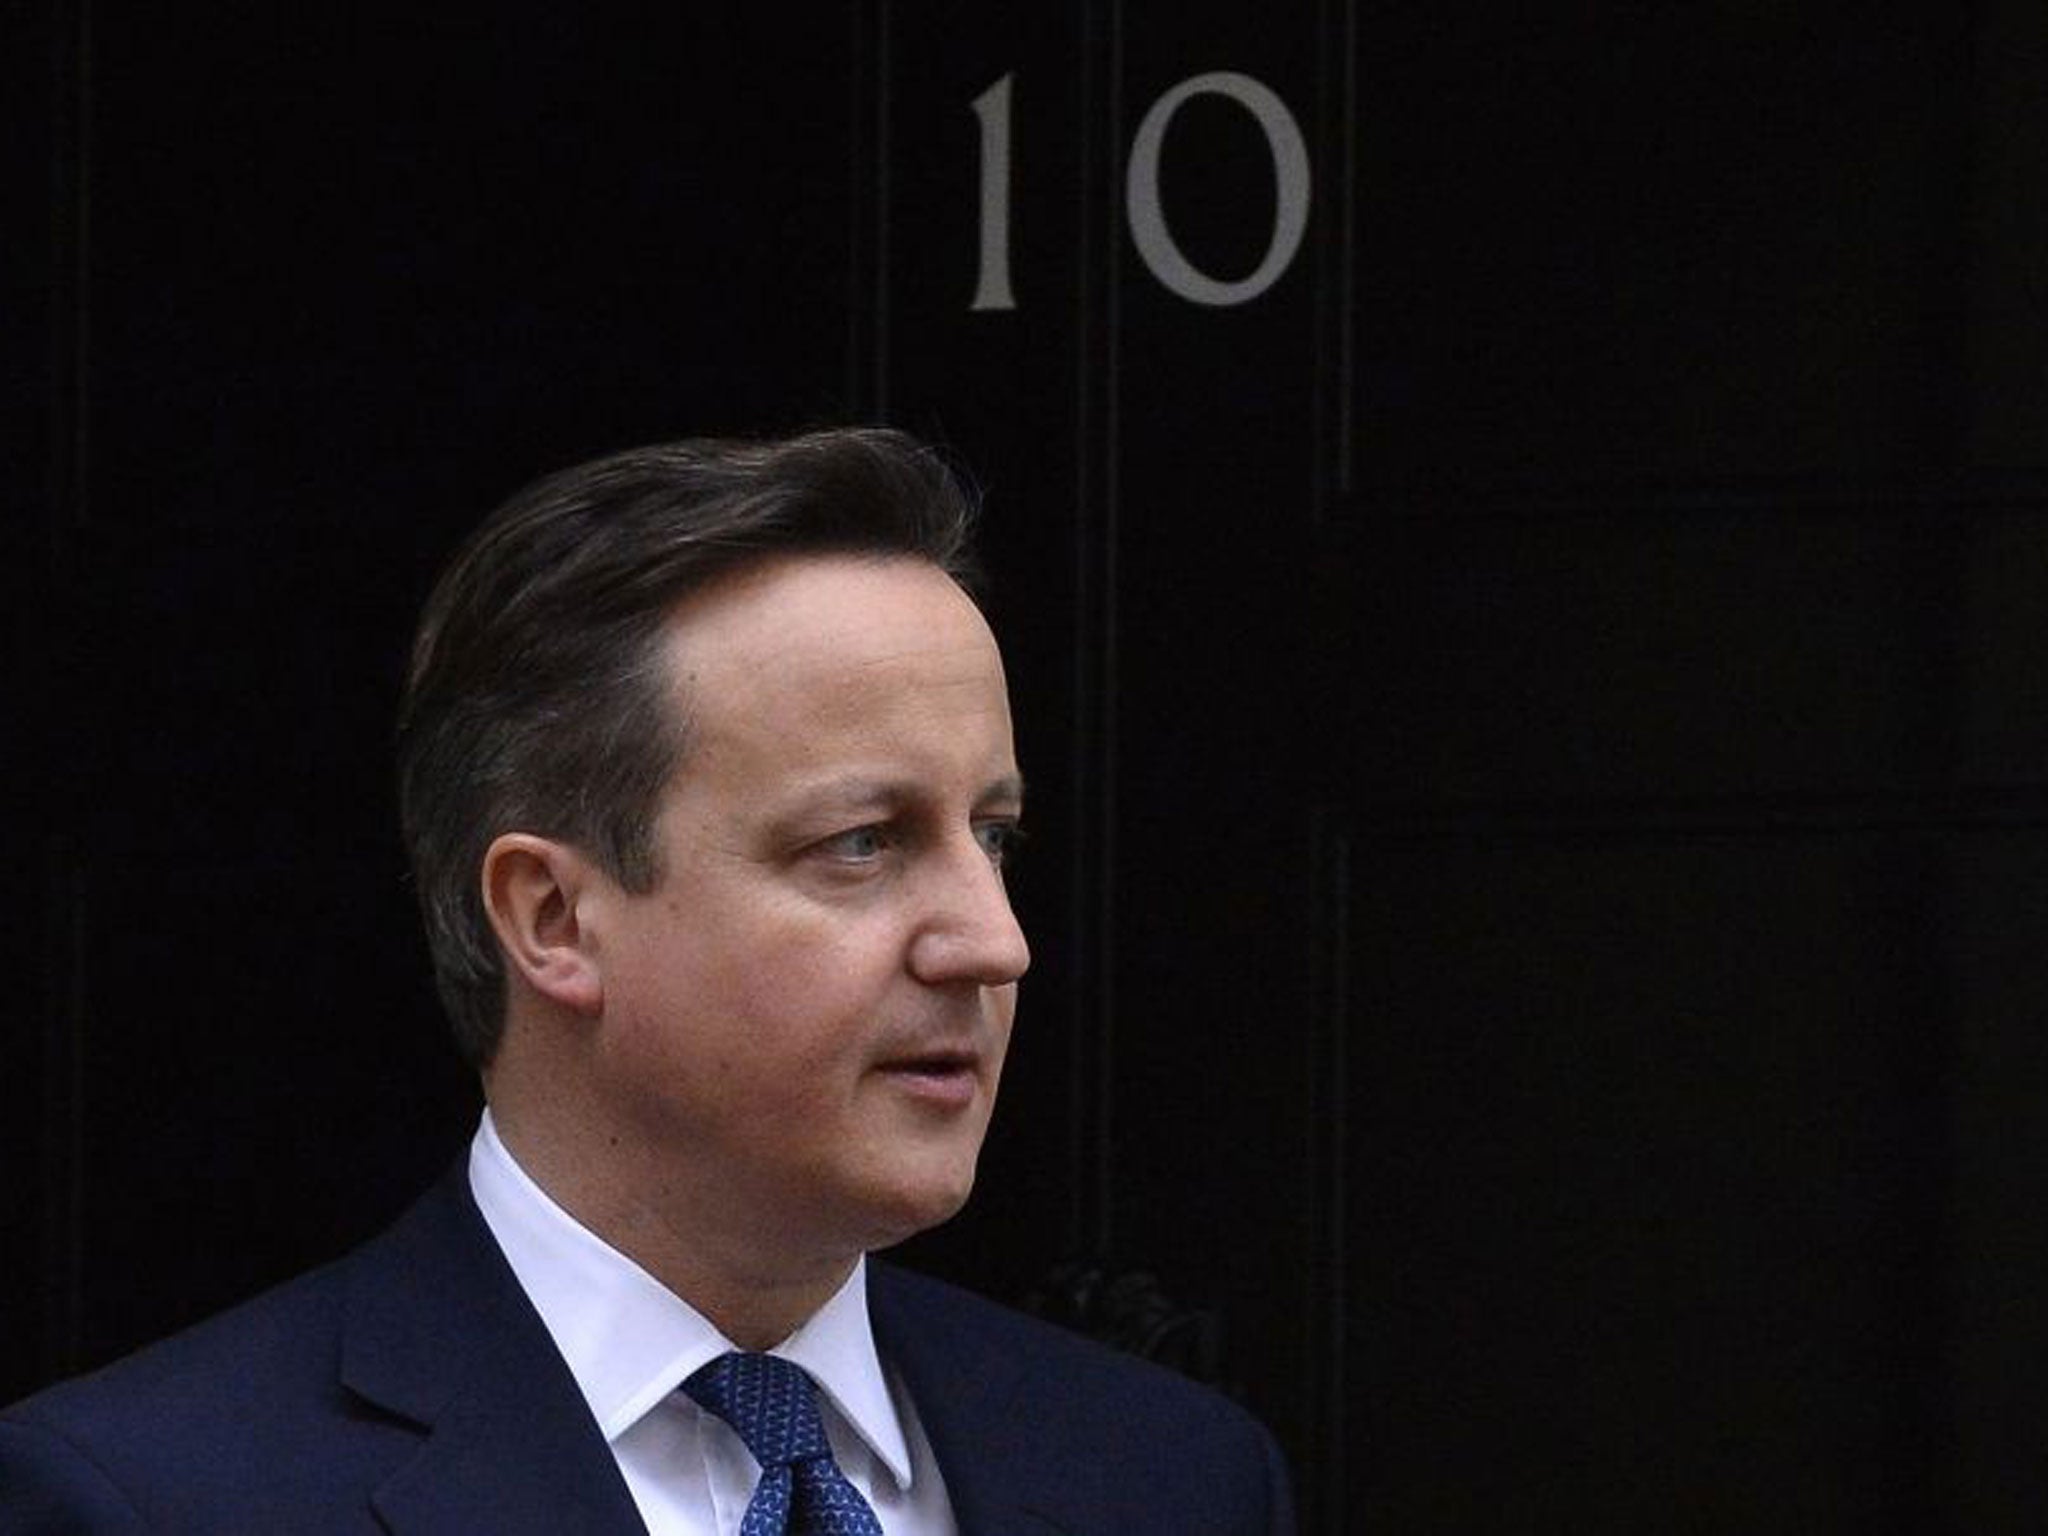 Is Cameron's relationship with the press too close?